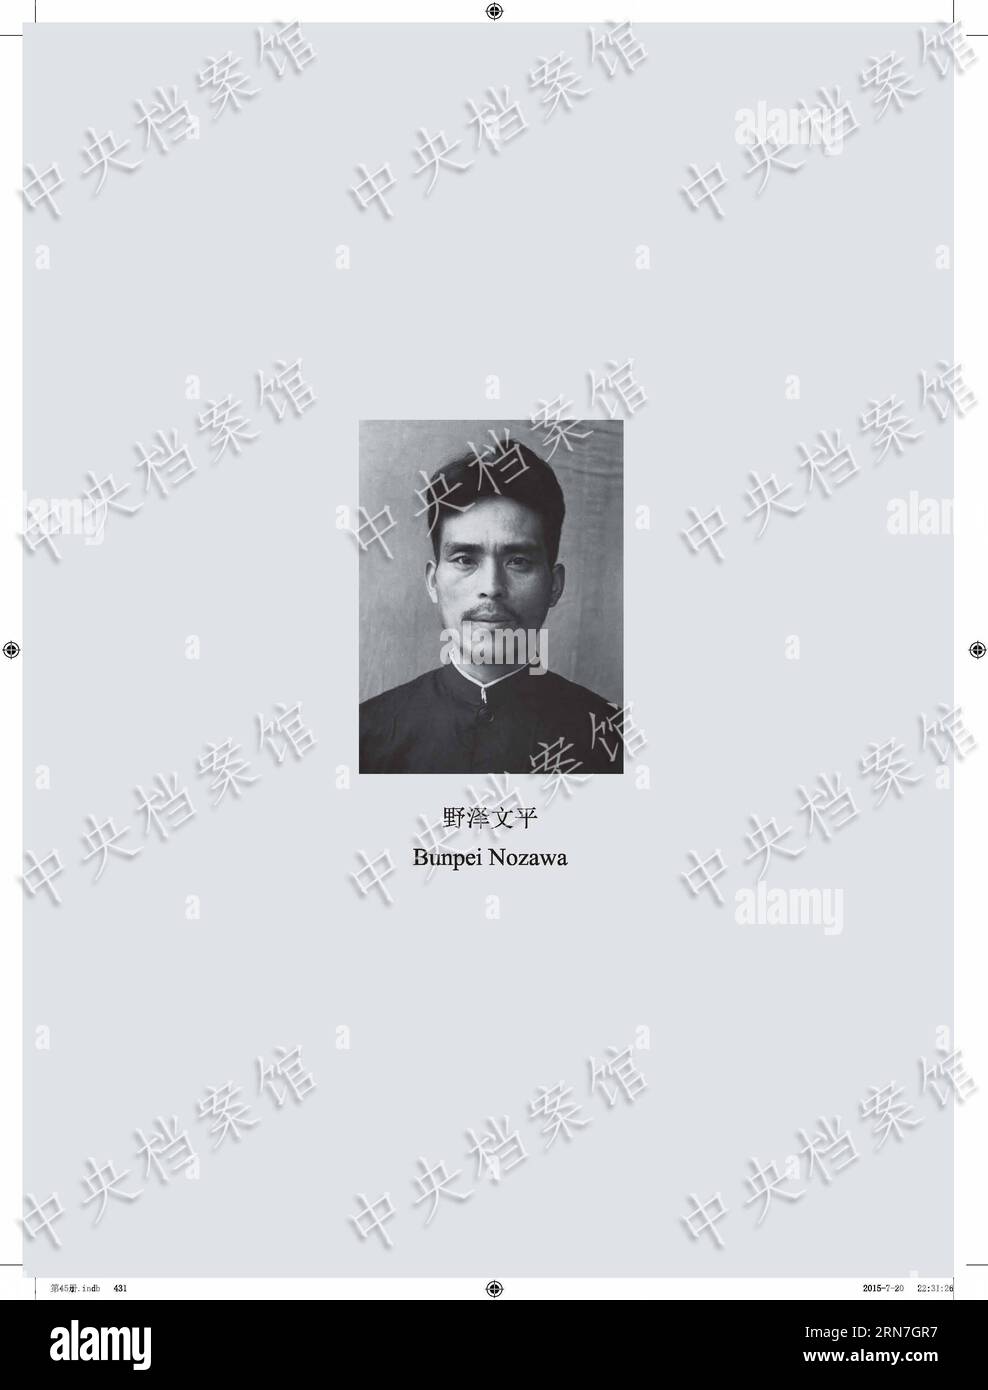 (150906) -- BEIJING, Sept. 6, 2015 () -- Photo released on Sept. 6, 2015 by the State Archives Administration of China on its website shows the image of Japanese war criminal Bunpei Nozawa. A handwritten confession by a Japanese soldier from World War II describes troops setting fire to about 100 homes in east China s Shandong Province in September 1941, burning some 50 Chinese civilians to death inside their homes. The State Archives Administration (SAA) of China published the confession by Bunpei Nozawa on Sunday. Nozawa, born in 1920, joined the Japanese invasion in 1940 and was captured in Stock Photo